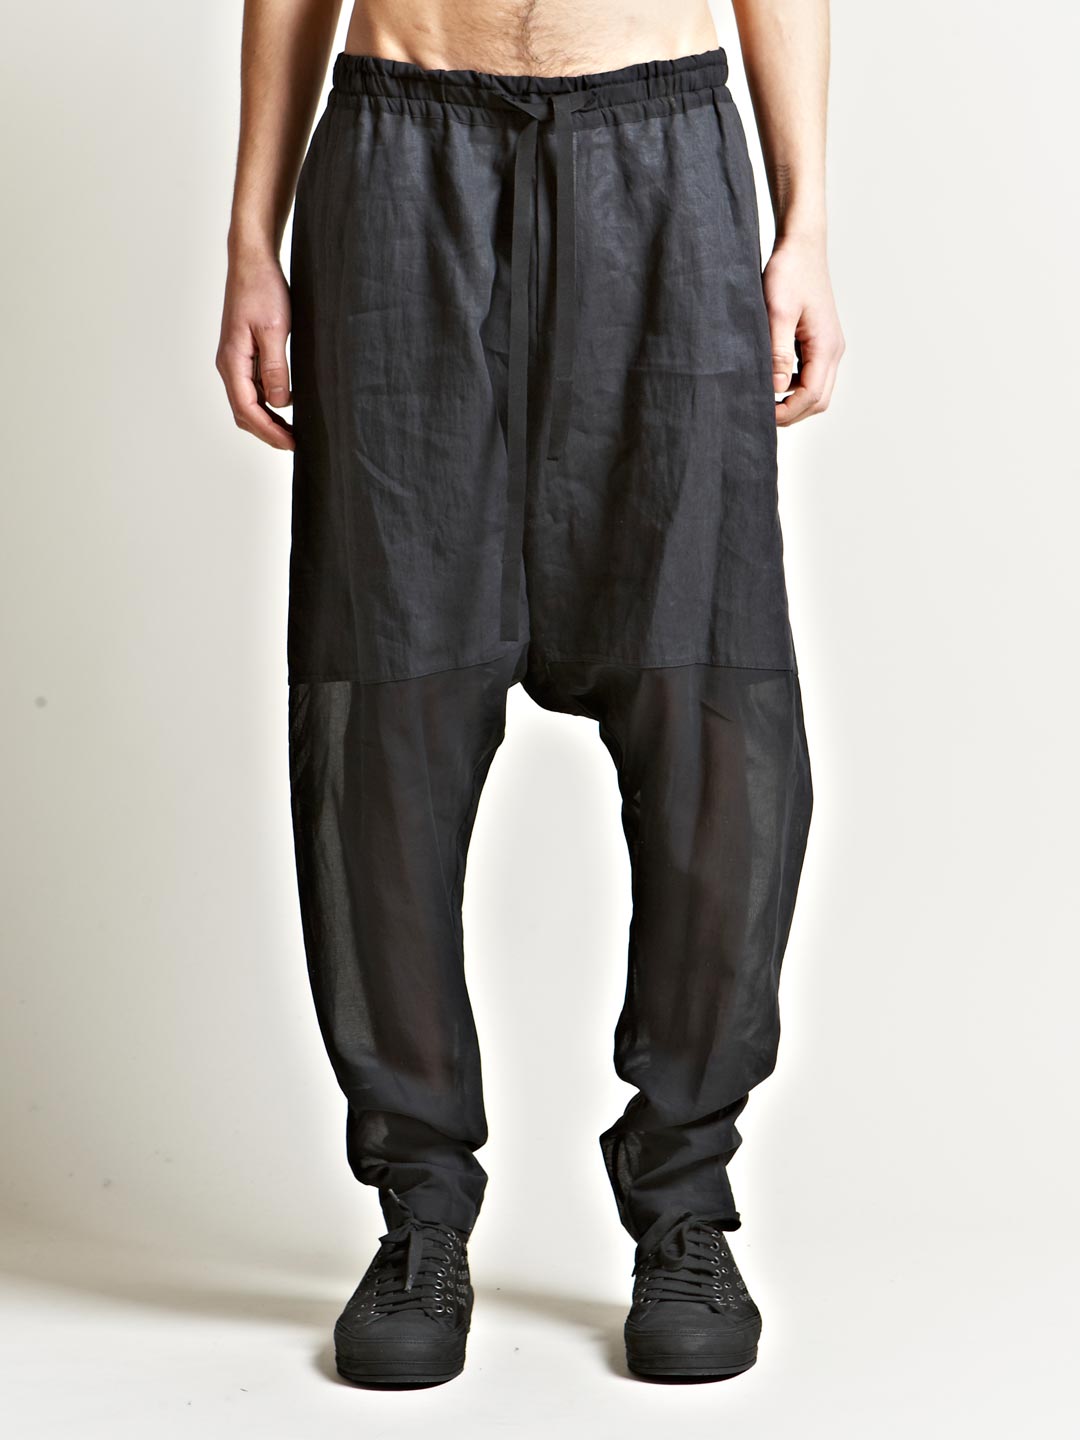 Lyst - Damir Doma Mens Paros Drop Crotch Trousers in Blue for Men